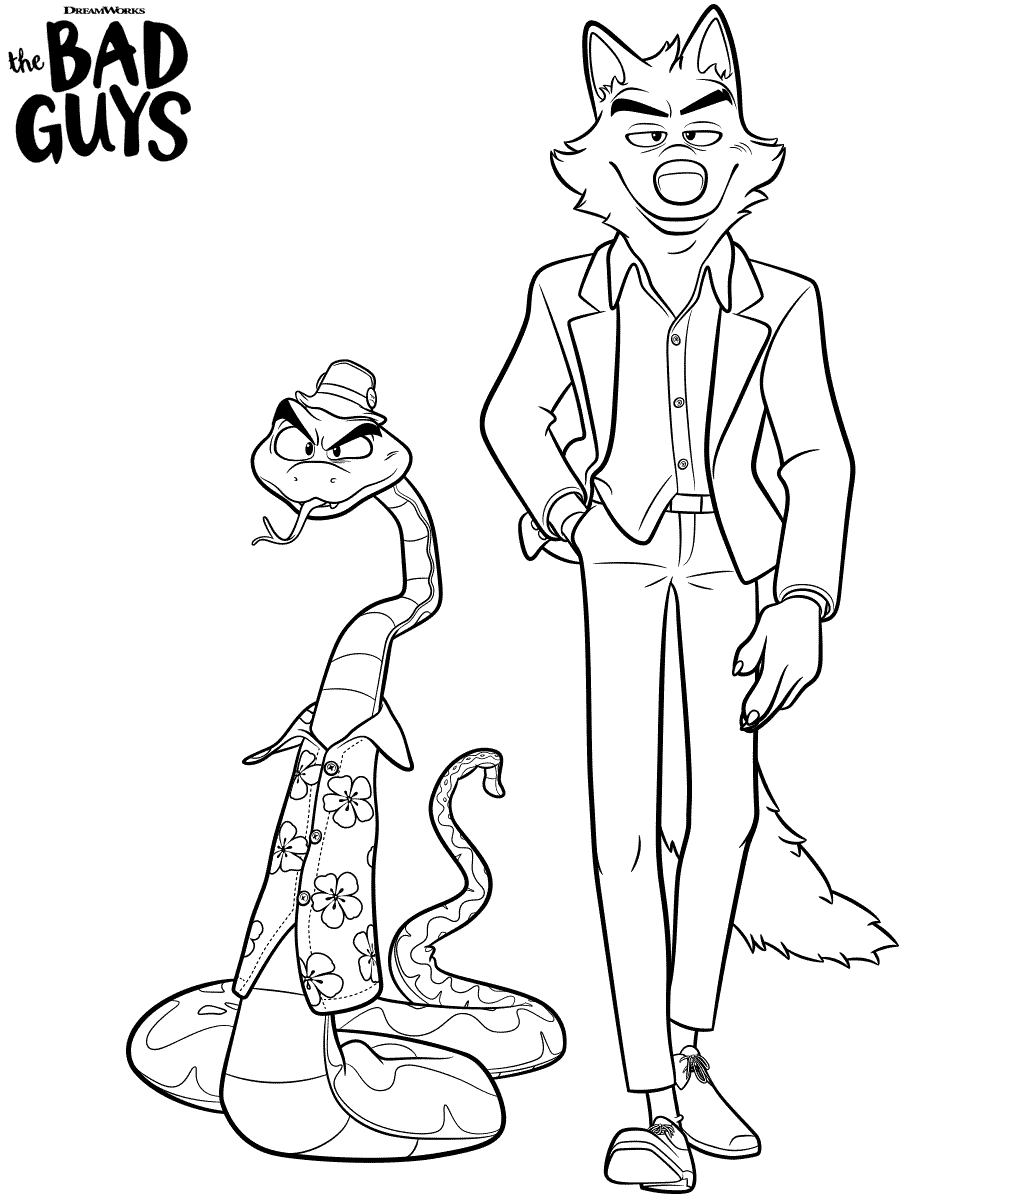 Mr. Snake and Mr. Wolf from Bad Guys Coloring Pages